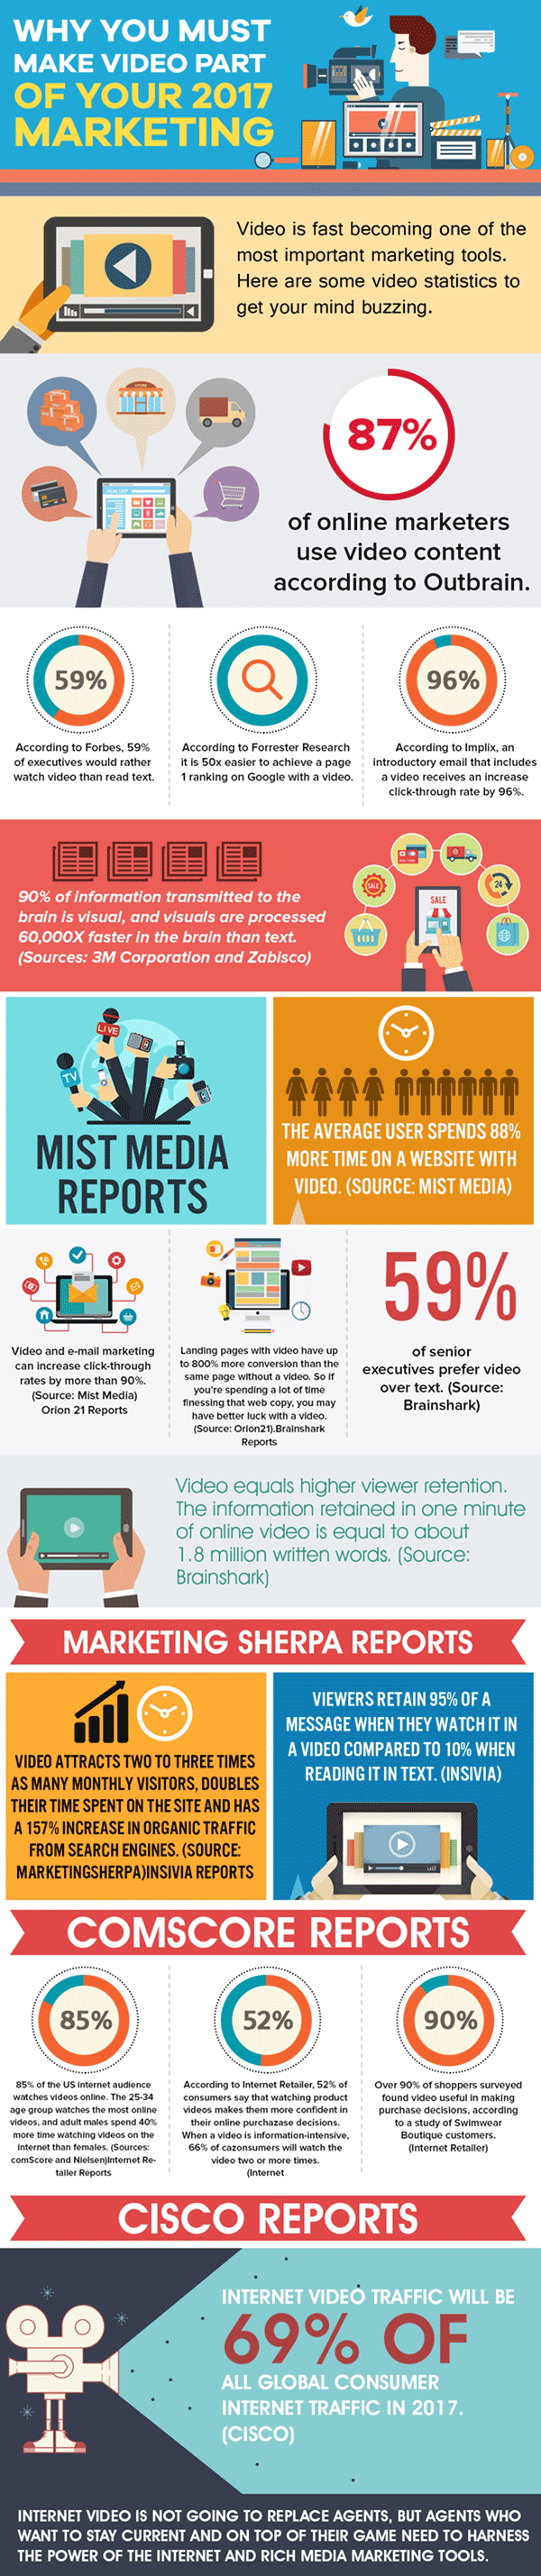 Video in Marketing full infographic